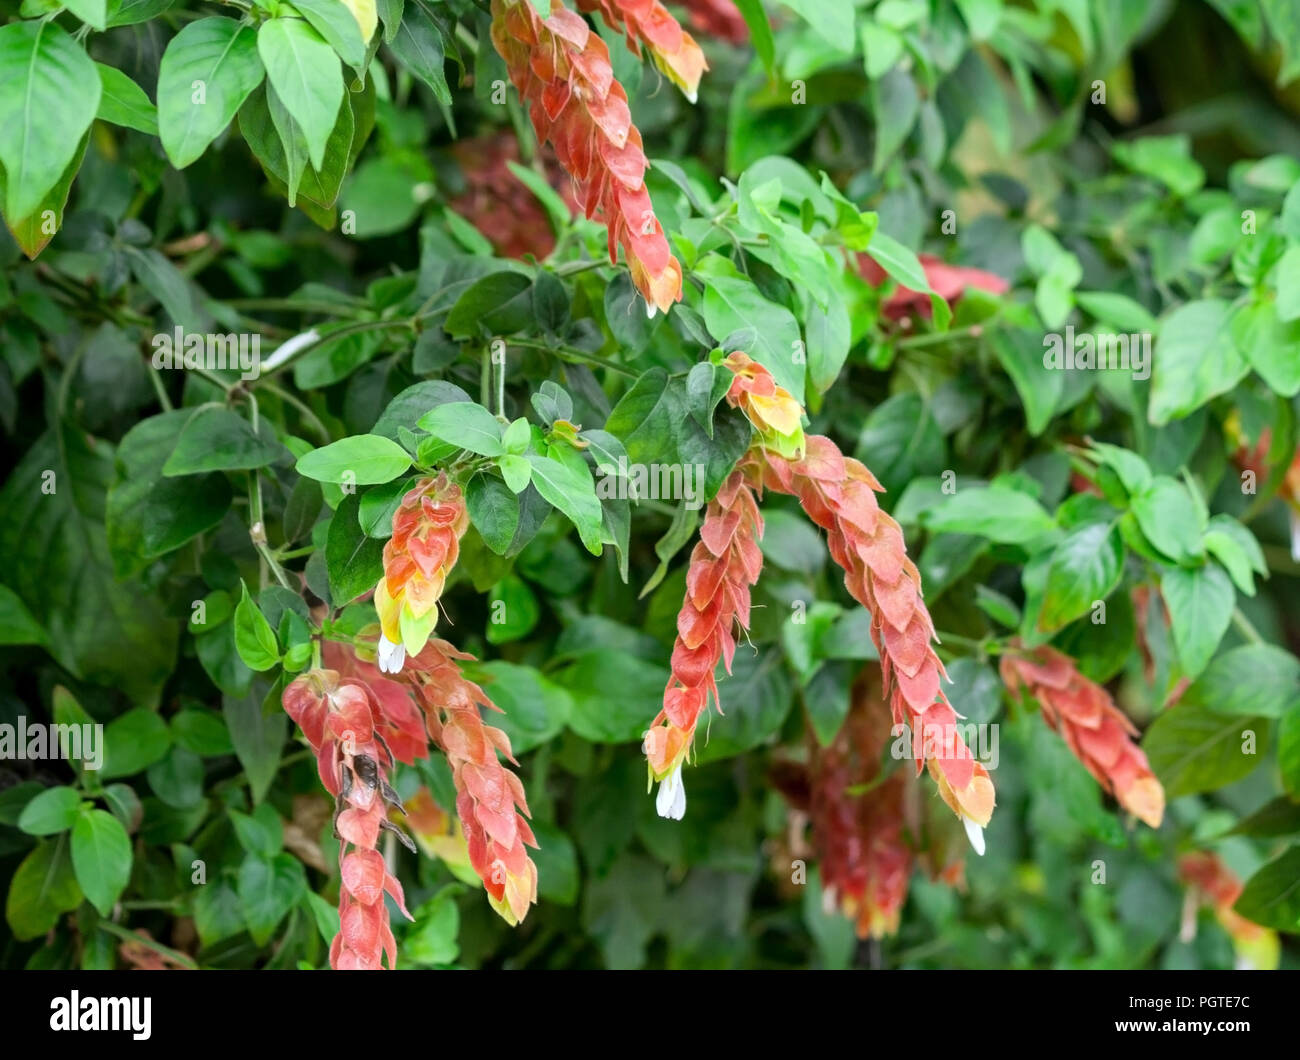 acanthaceae beloperone guttata brandegeei piliena, a bush with long red and orange flowers with white buds at the ends, close-up, green foliage Stock Photo